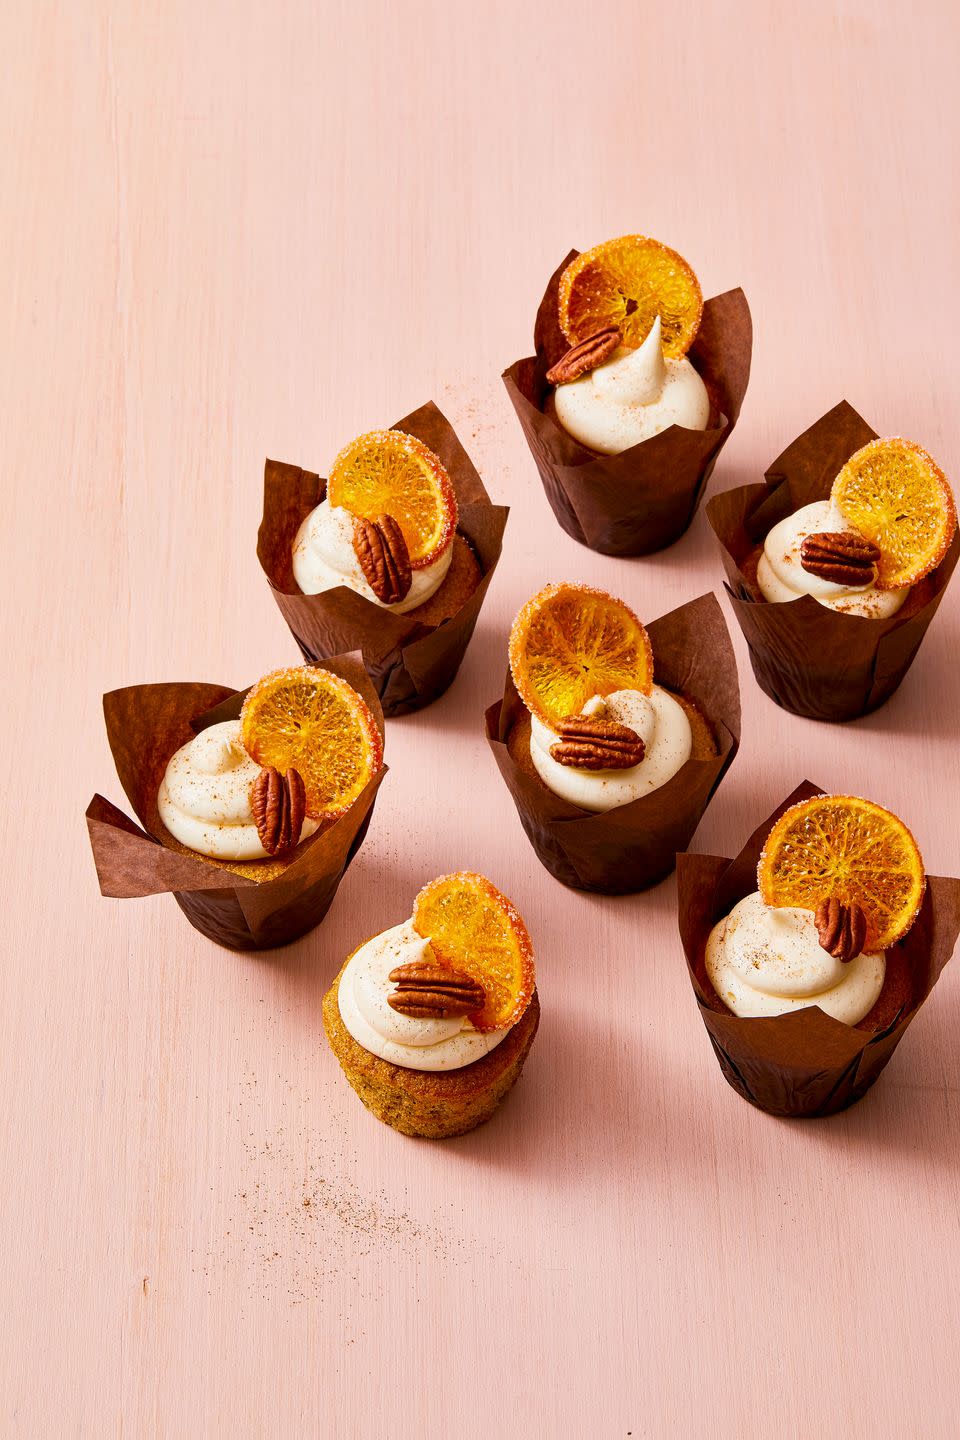 <p>These spiced bites get extra holiday flair from store-bought <a href="https://www.amazon.com/Trader-Joes-Sweetened-Orange-Slices/dp/B01KN755VI/?linkCode=ogi&tag=syn-yahoo-20&ascsubtag=%5Bartid%7C10055.g.40601886%5Bsrc%7Cyahoo-us" rel="nofollow noopener" target="_blank" data-ylk="slk:candied orange slices" class="link ">candied orange slices</a>.</p><p>Get the <a href="https://www.goodhousekeeping.com/food-recipes/a36972545/pecan-cupcakes-with-spiced-vanilla-frosting-recipe/" rel="nofollow noopener" target="_blank" data-ylk="slk:Pecan Cupcakes With Spiced Vanilla Frosting recipe" class="link "><strong>Pecan Cupcakes With Spiced Vanilla Frosting recipe</strong></a>.</p>